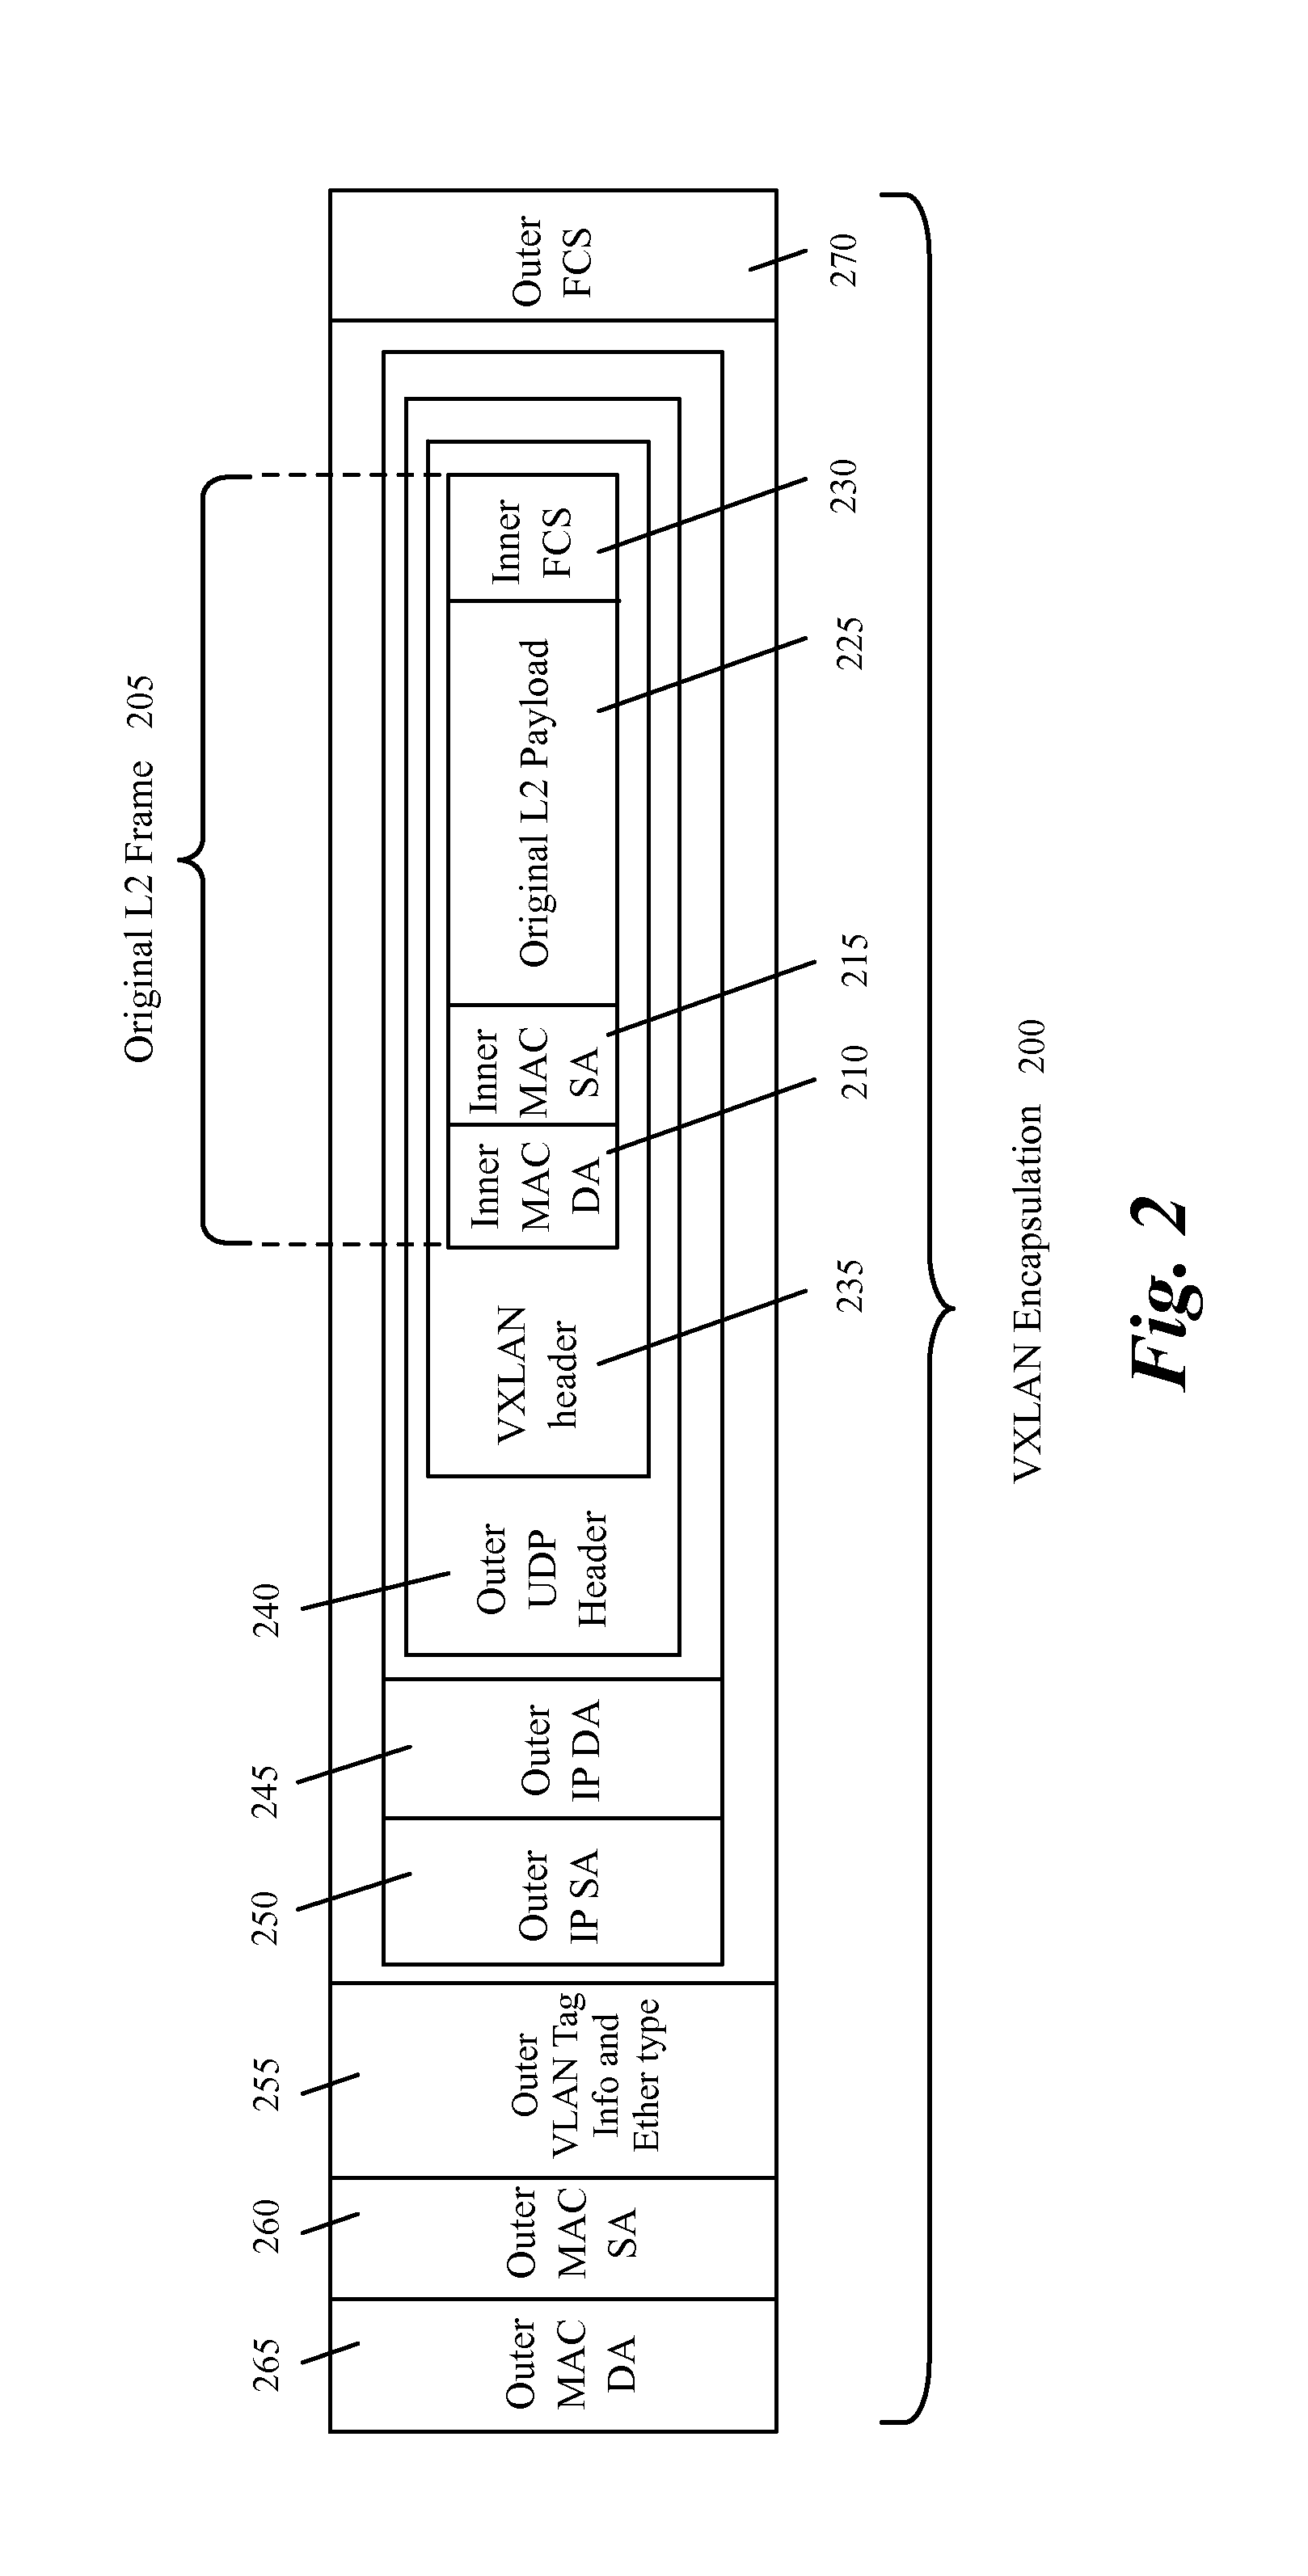 Methods and systems for providing multi-tenancy support for single root I/O virtualization